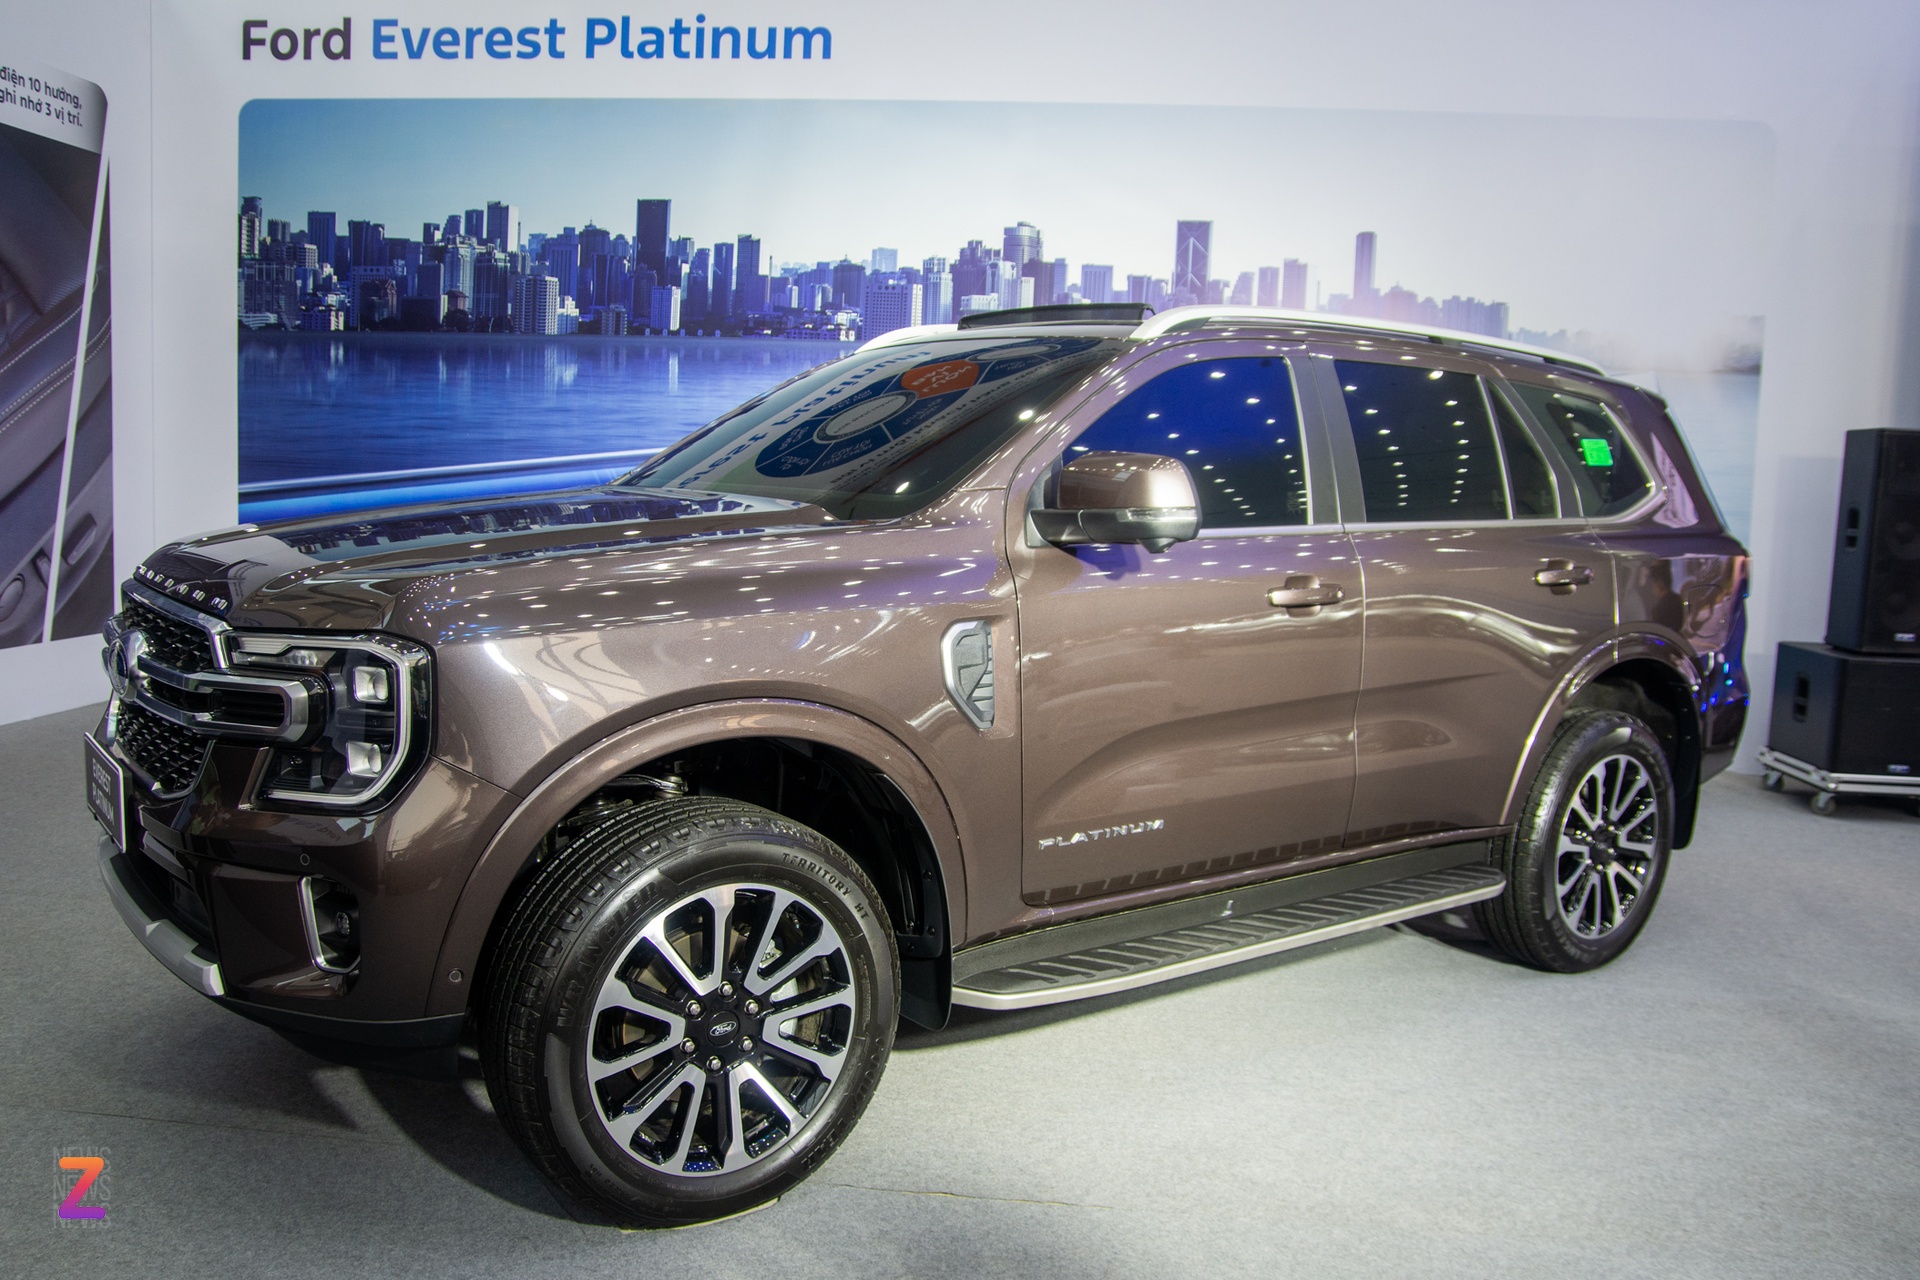 Ford Everest Platinum mo ban anh 1